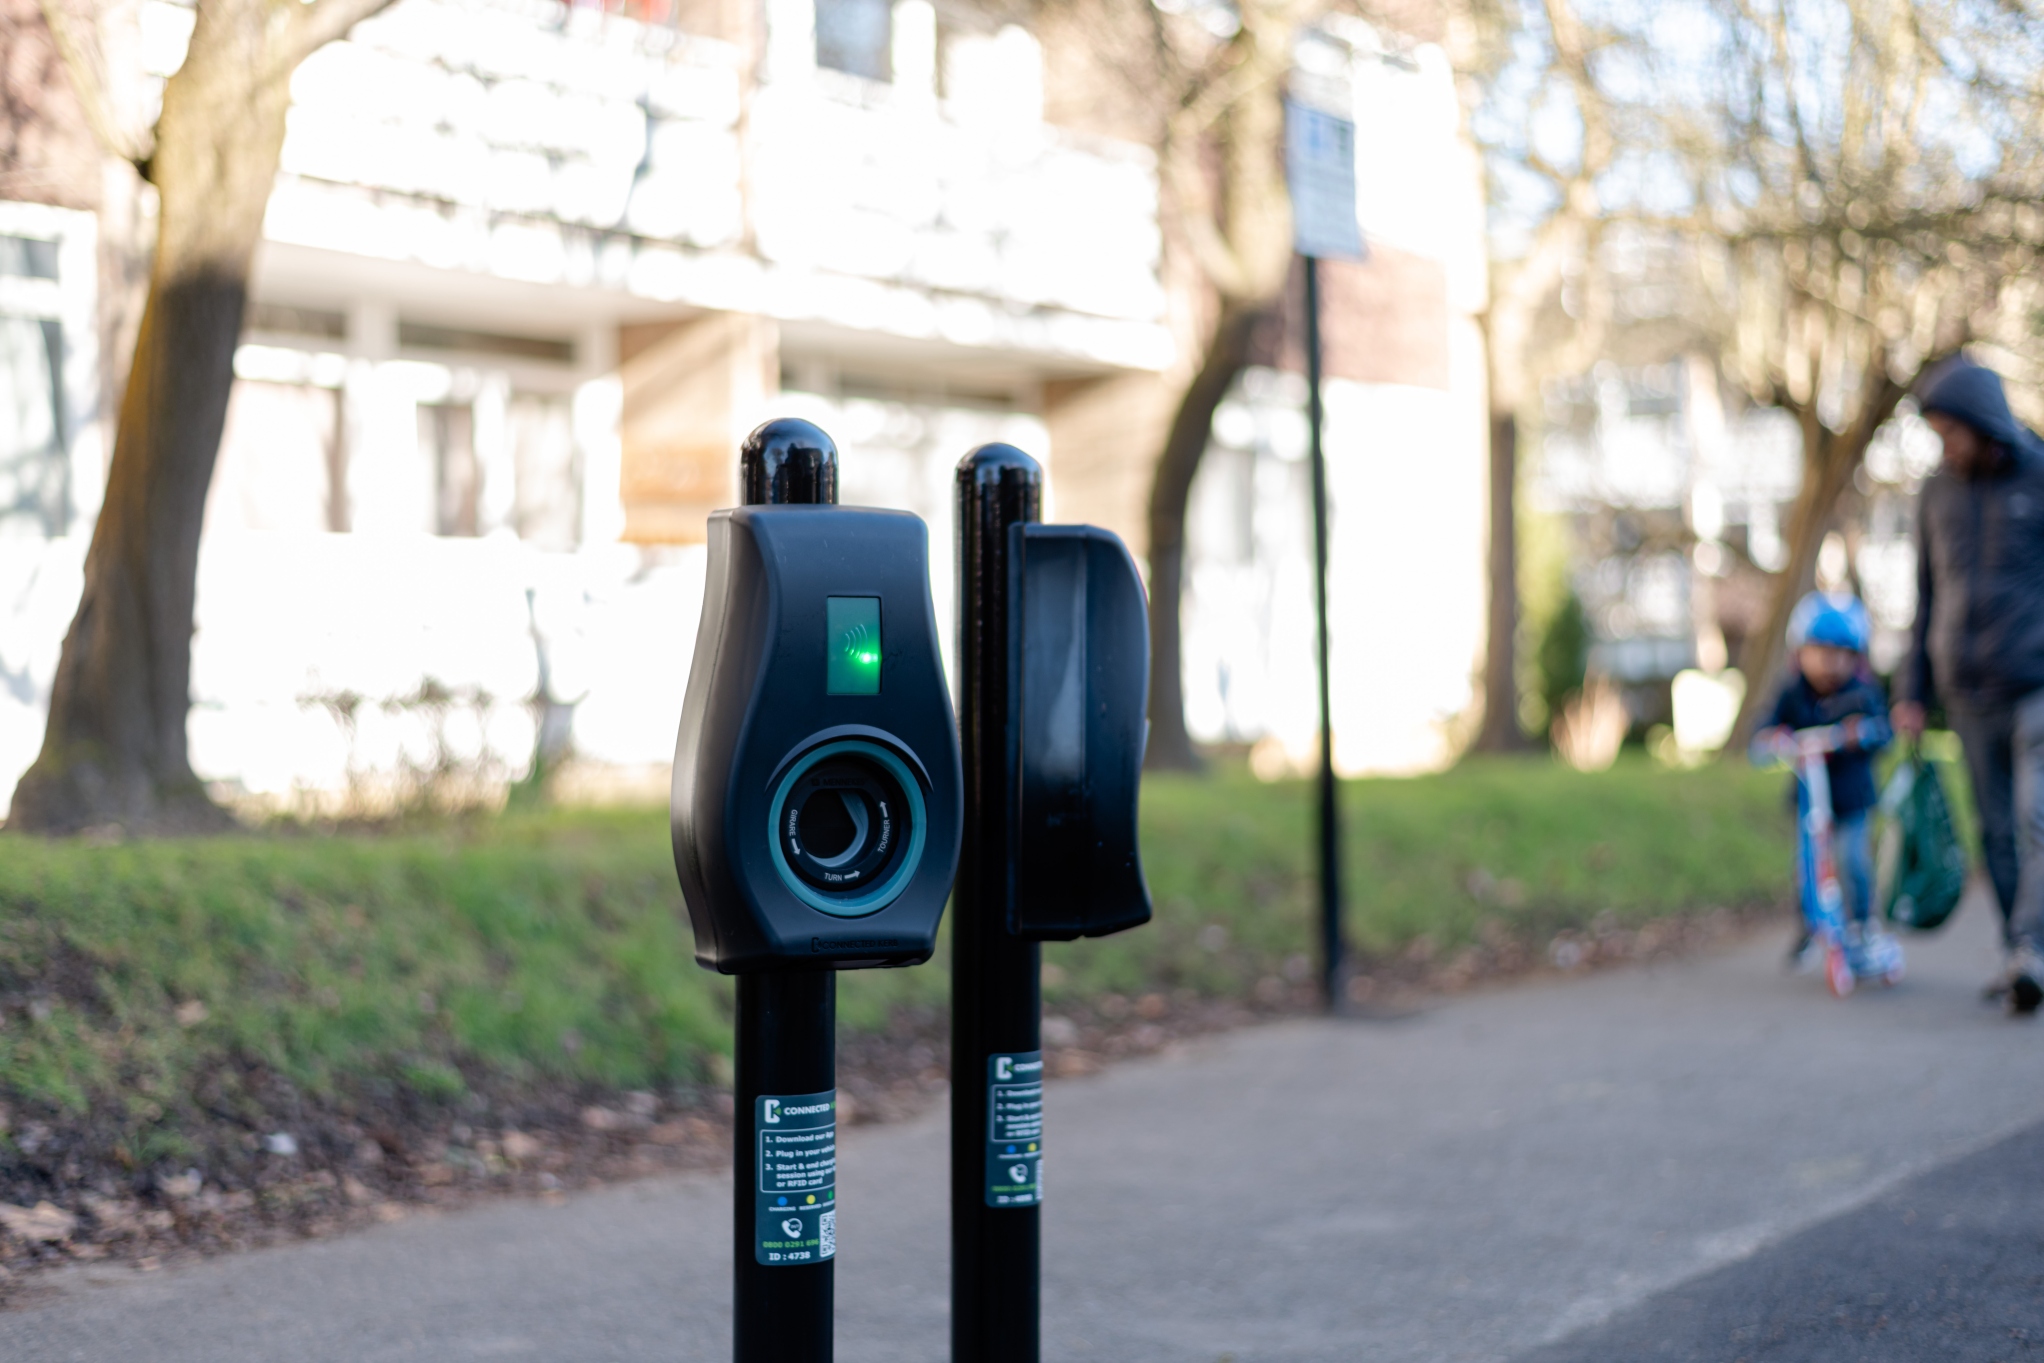 Connected Kerb & Surrey County Council announce 10,000 public EV charging points by 2030